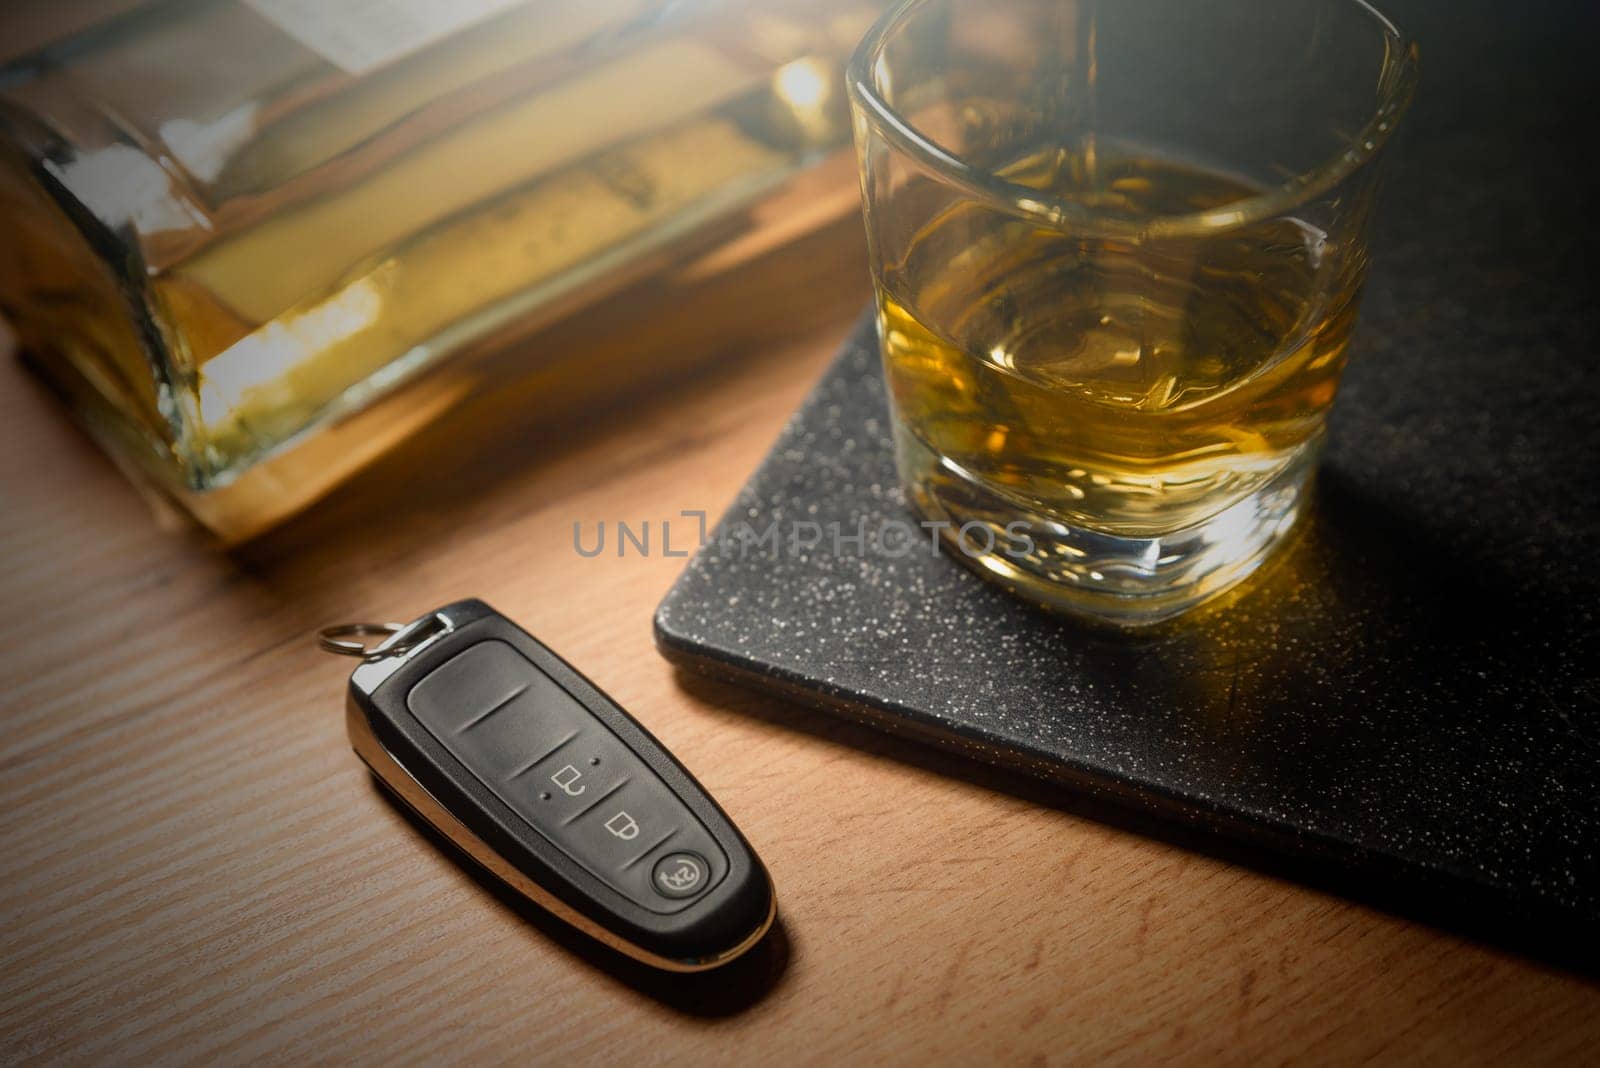 Drink and drive, alcoholism with car keys by simpson33